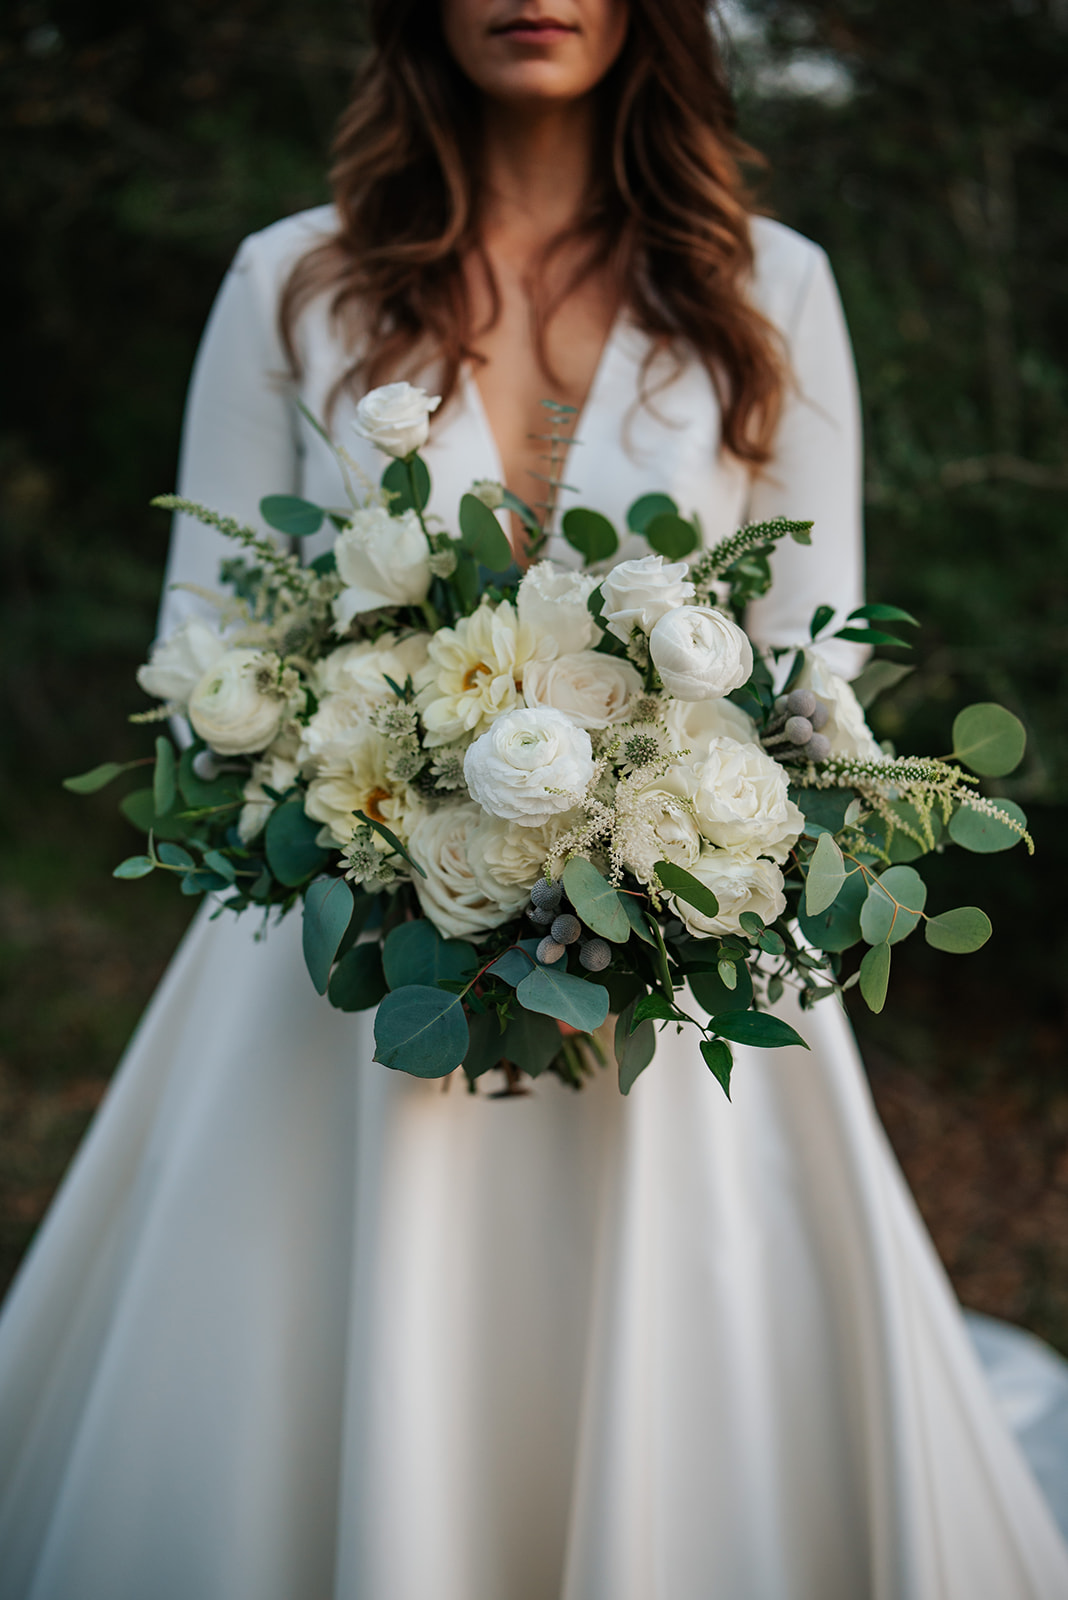 A close up photo of the bride's flower bouquet full of white and ivory flowers including Ranunculus, garden roses and Dahlias. 